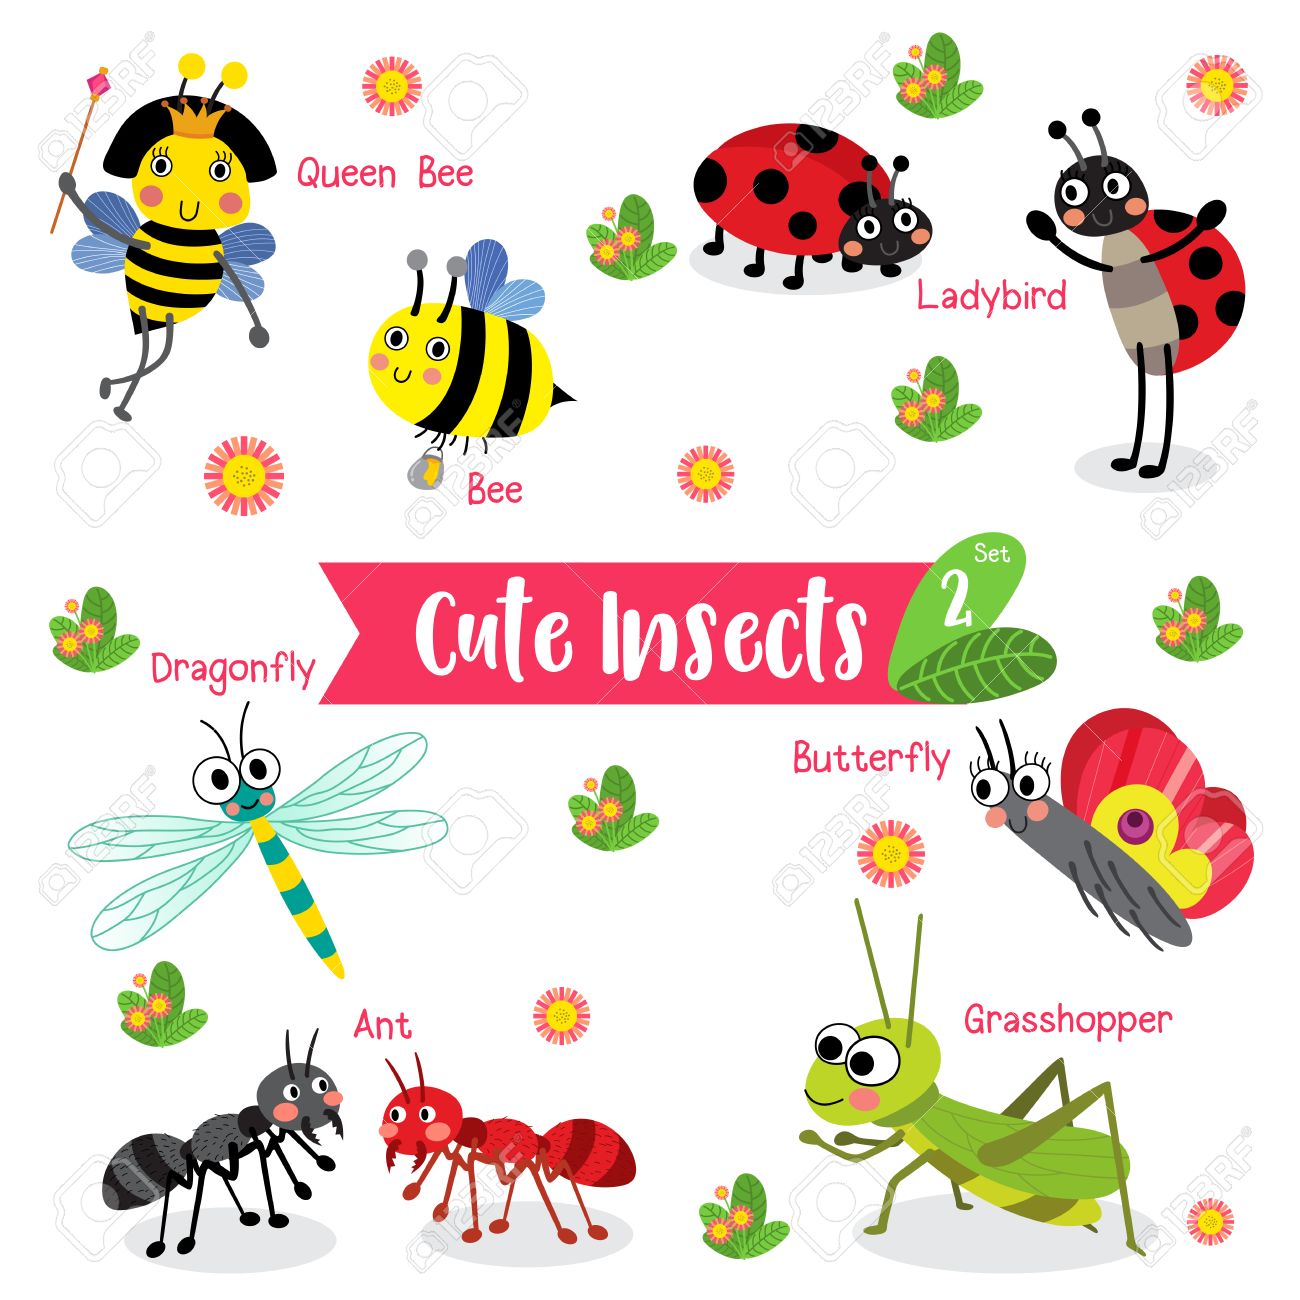 Cute Insects Animal cartoon on white background with animal name.